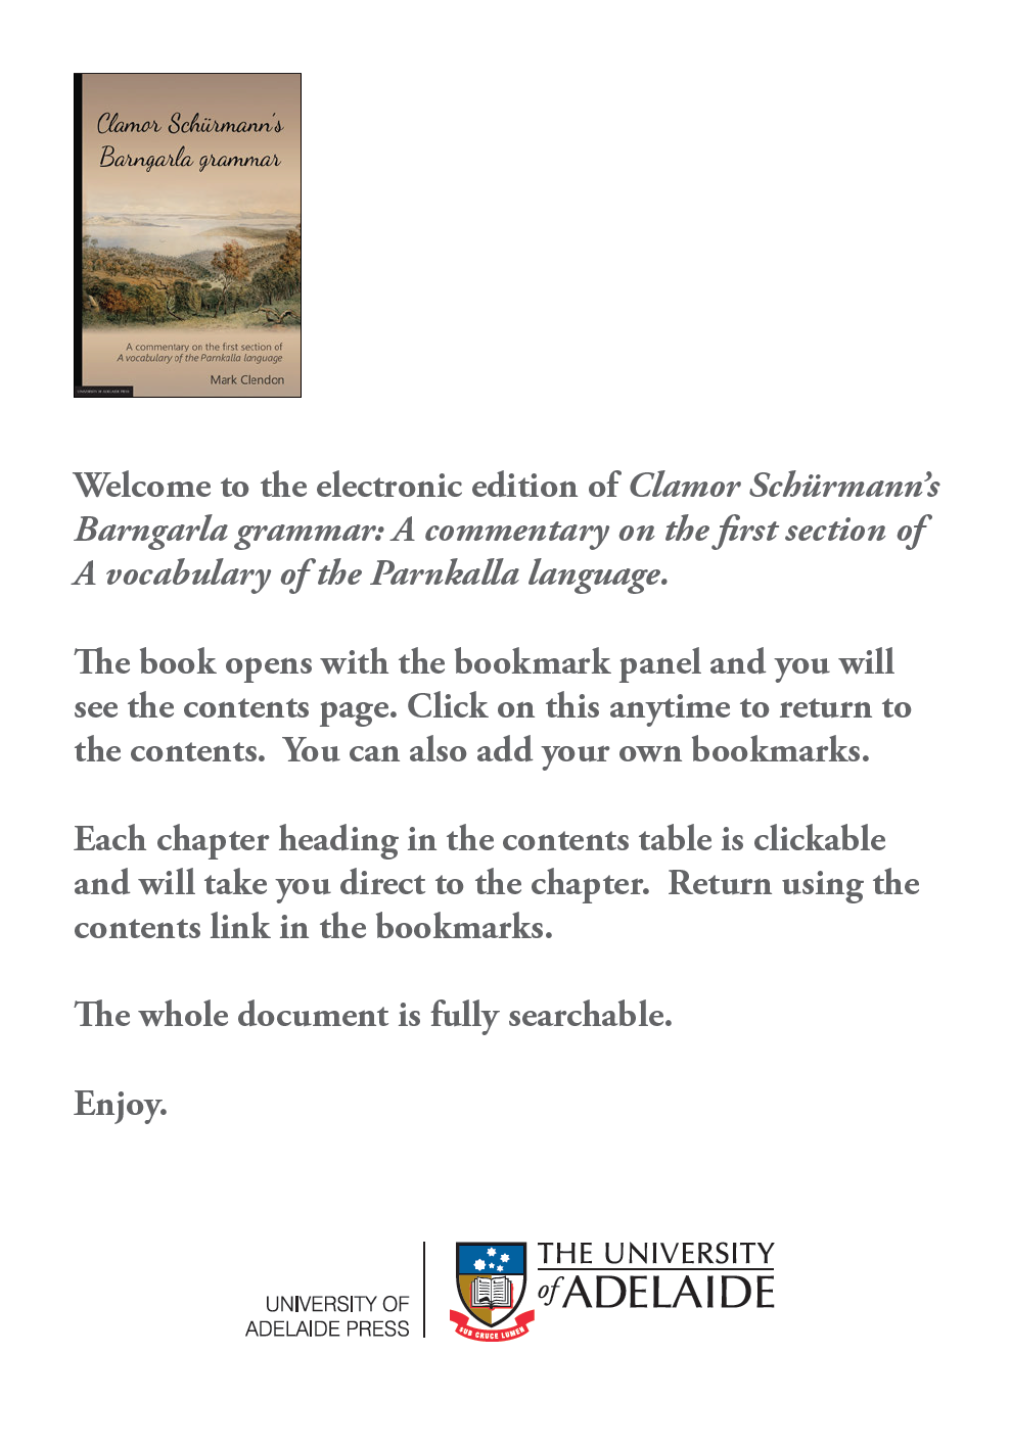 Clamor Schürmann's Barngarla Grammar This Book Is Available As a Free Fully-Searchable Ebook from Clamor Schürmann's Barngarla Grammar